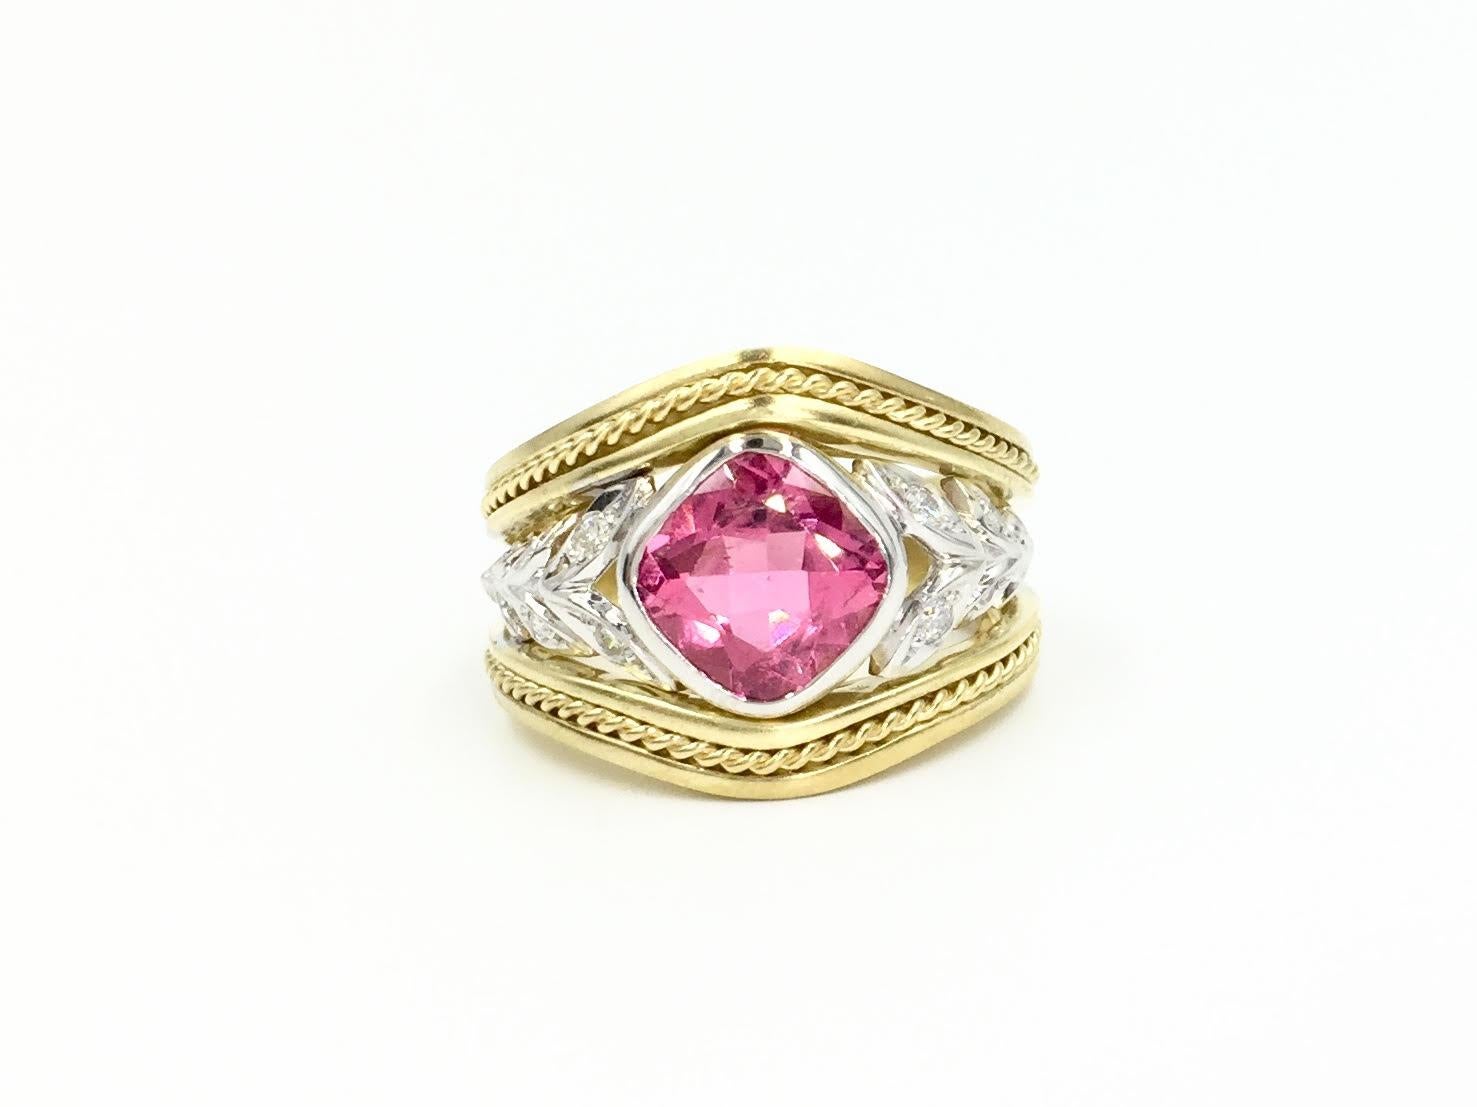 Made by SeidenGang. This unique 18 karat two tone gold ring features a bright cushion cut pink tourmaline center. A cut out leaf design has a diamond set in the center of each leaf with a total weight of .27 carats. Ring has a width of 11mm and